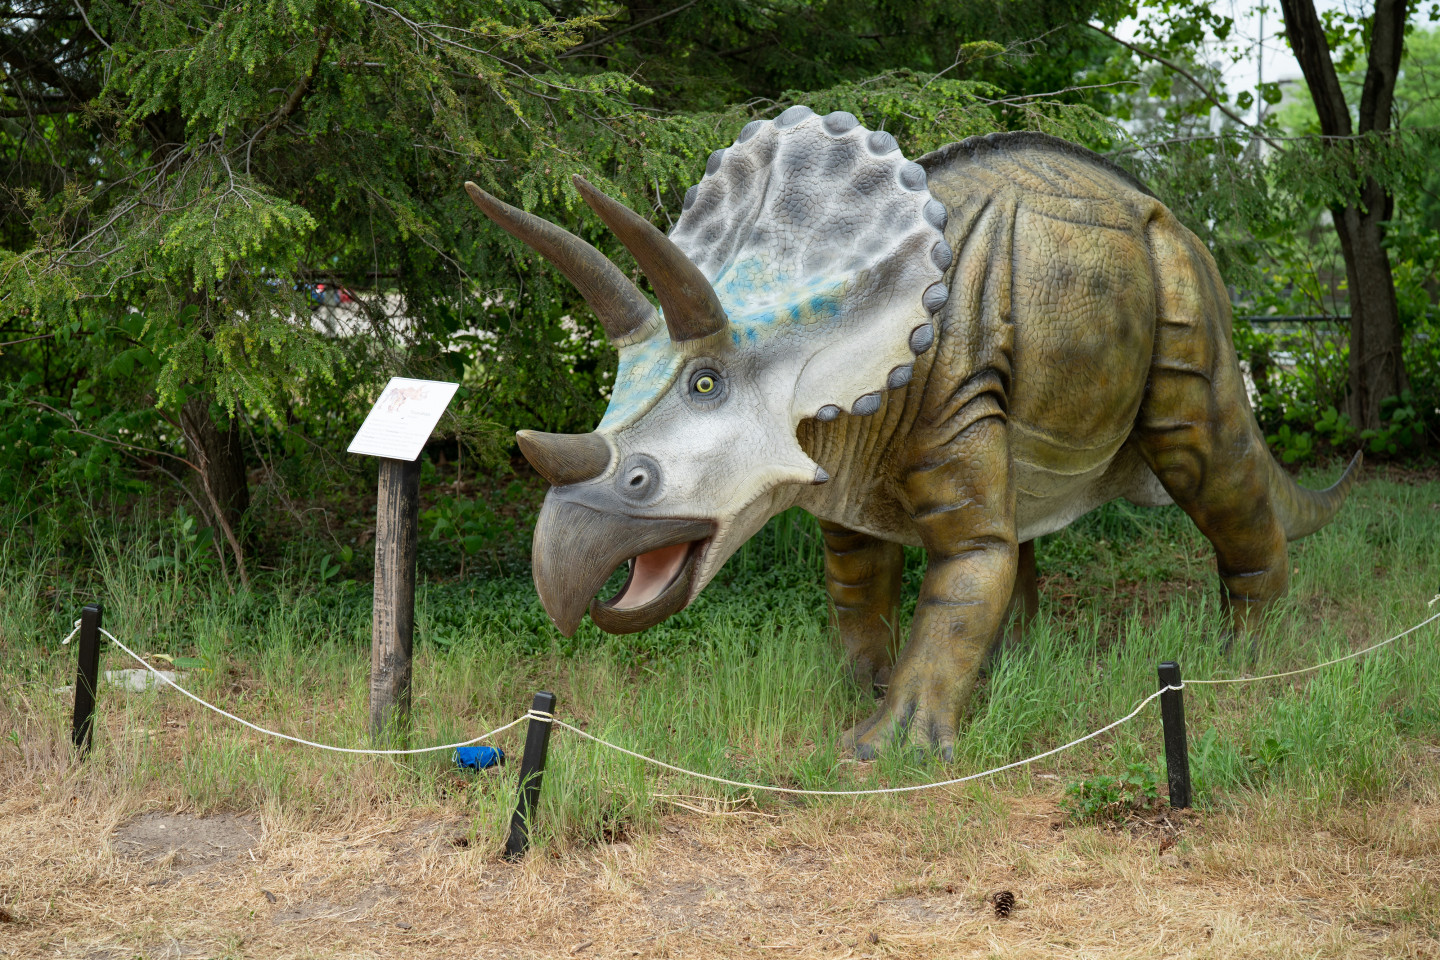 A triceratops statue.